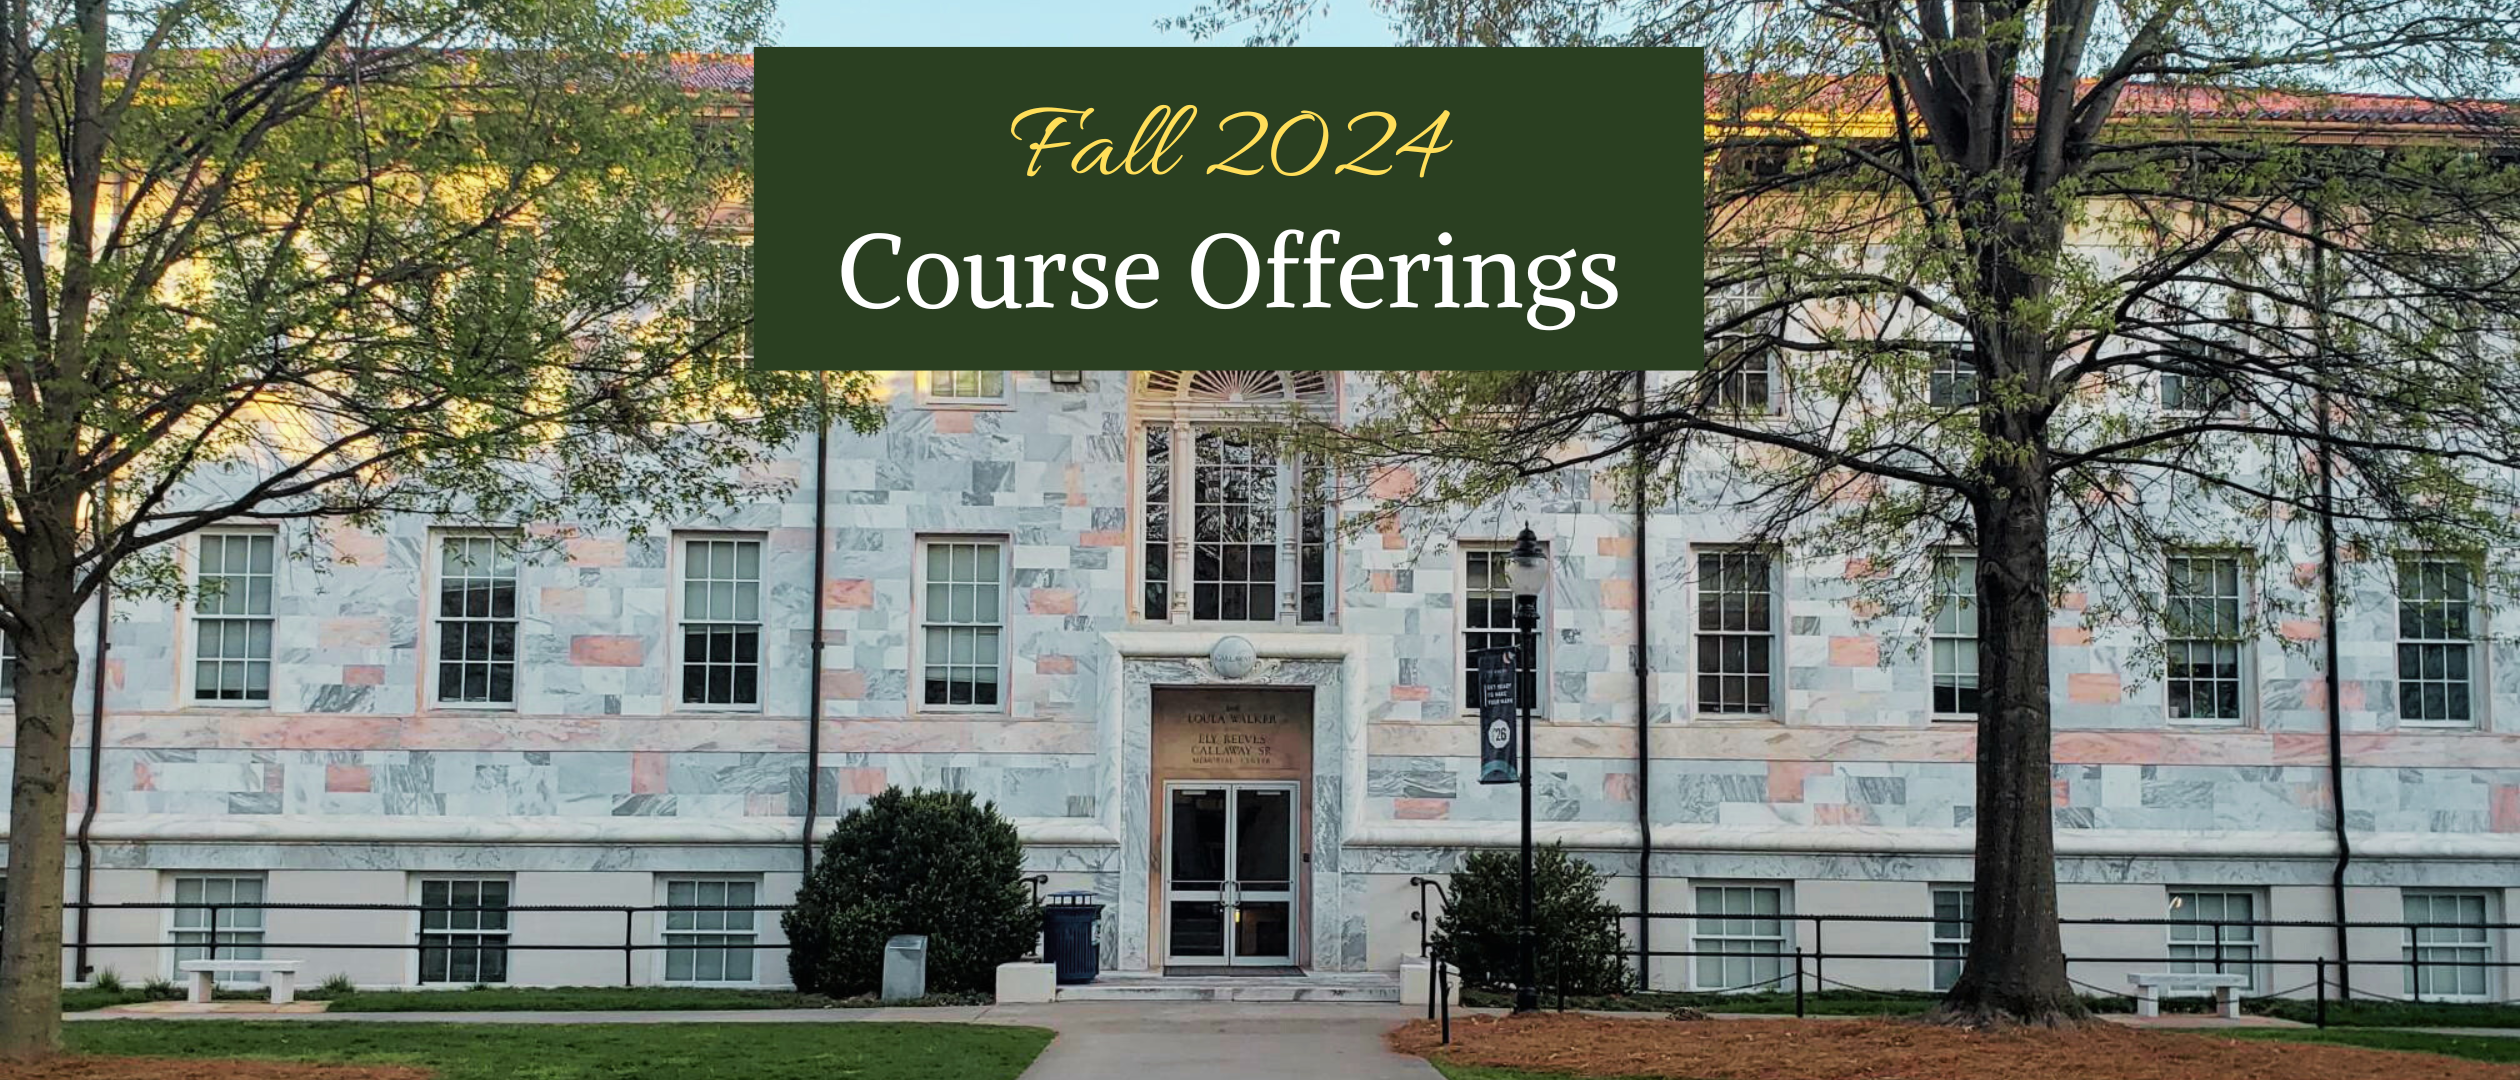 Fall 2024 Course Offerings